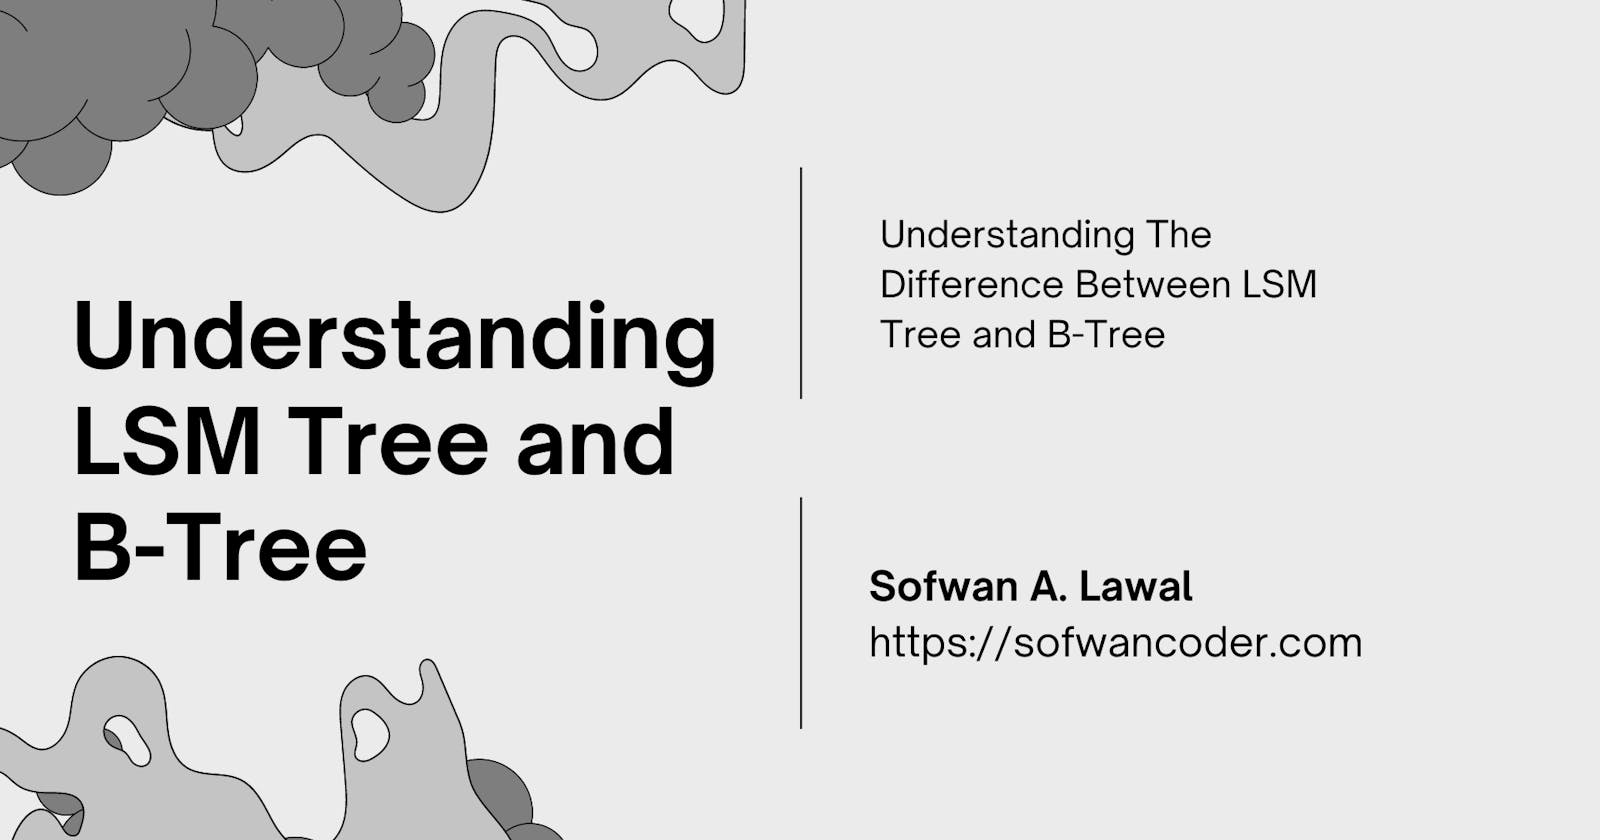 Understanding The Difference Between LSM Tree and B-Tree